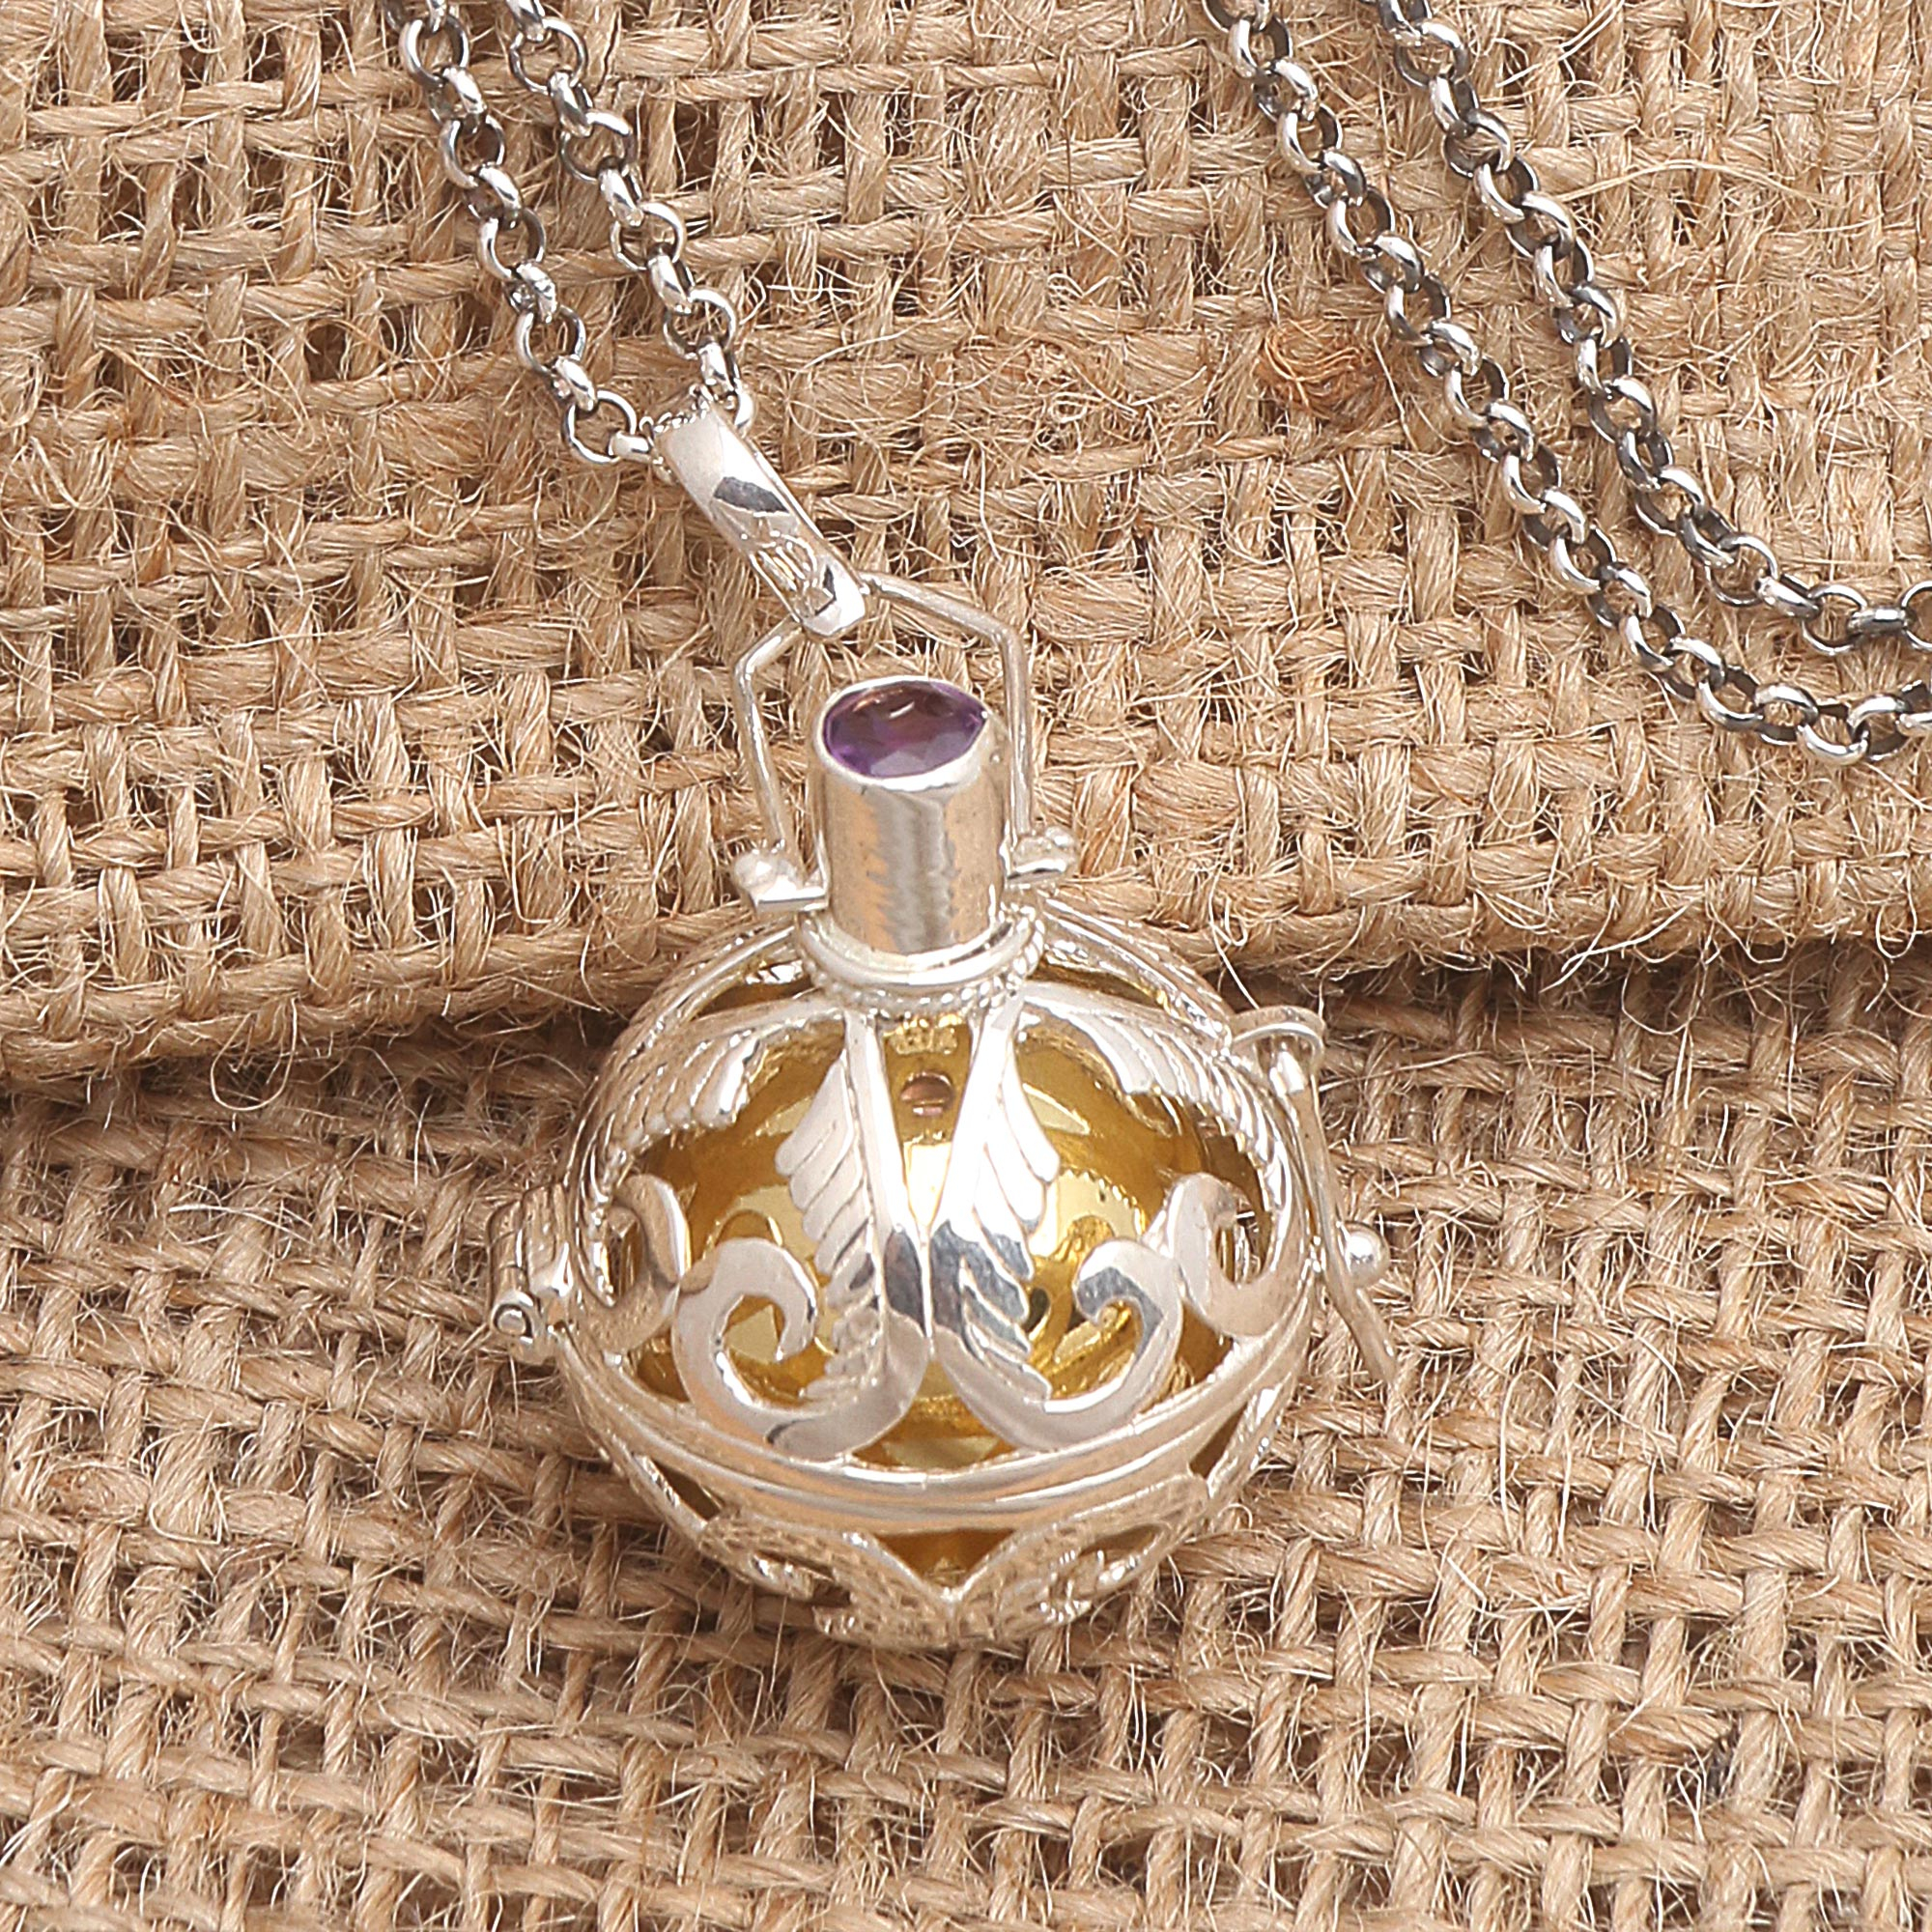 Charming 925 Sterling Silver Rainbow Pearl Cage Pendant for 7-8